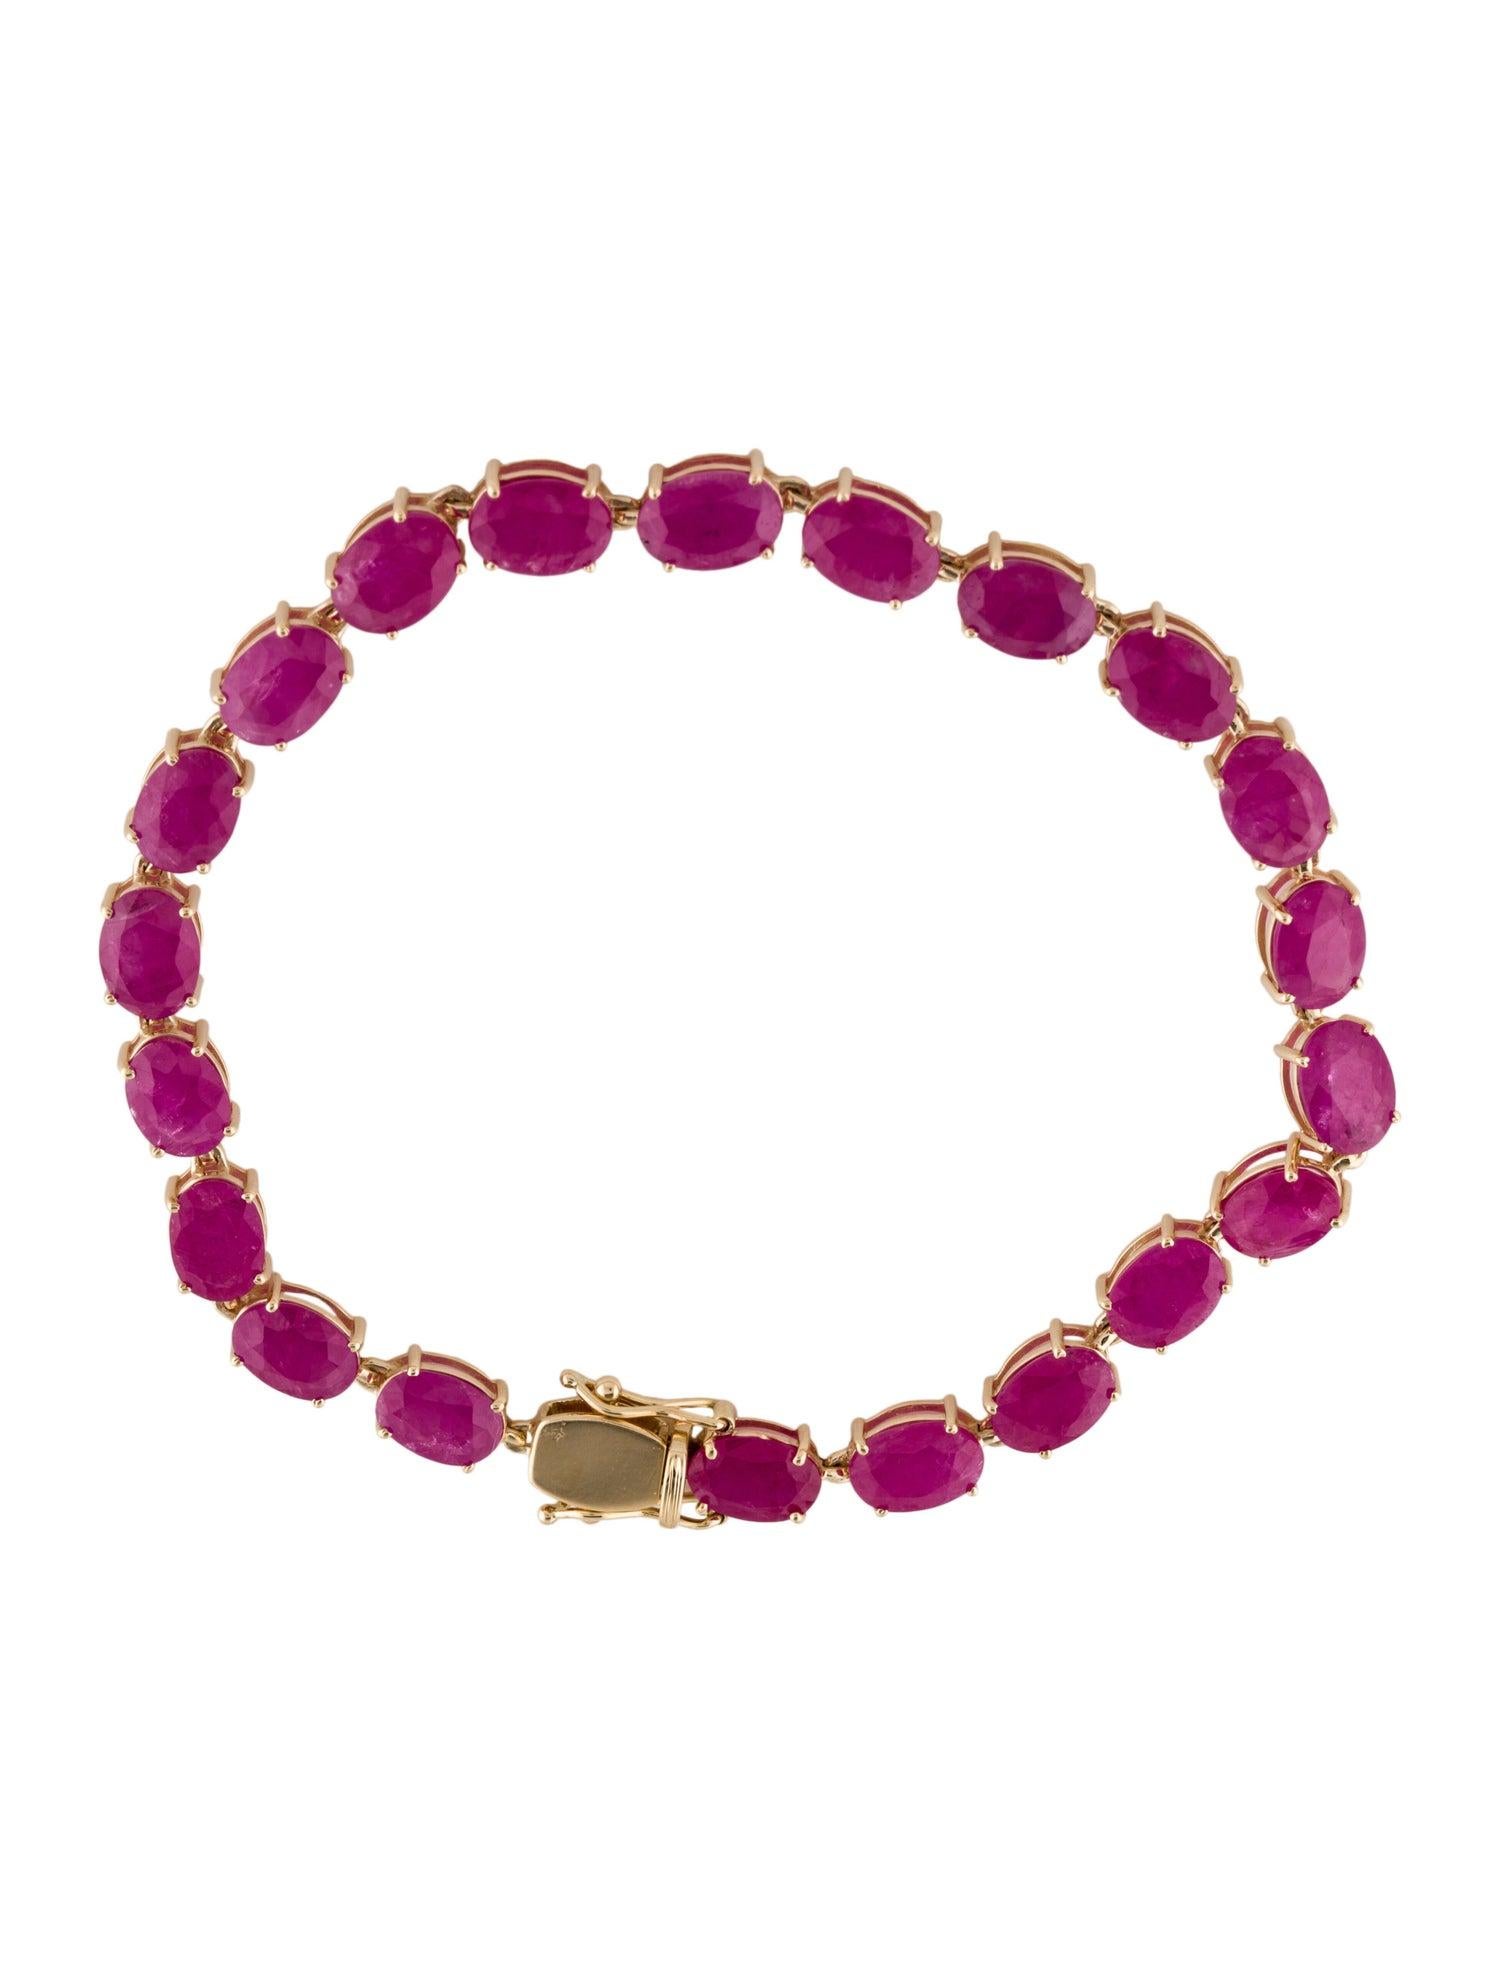 14K 19.13ctw Ruby Tennis Bracelet - Exquisite Elegance, Timeless Luxury Design In New Condition For Sale In Holtsville, NY